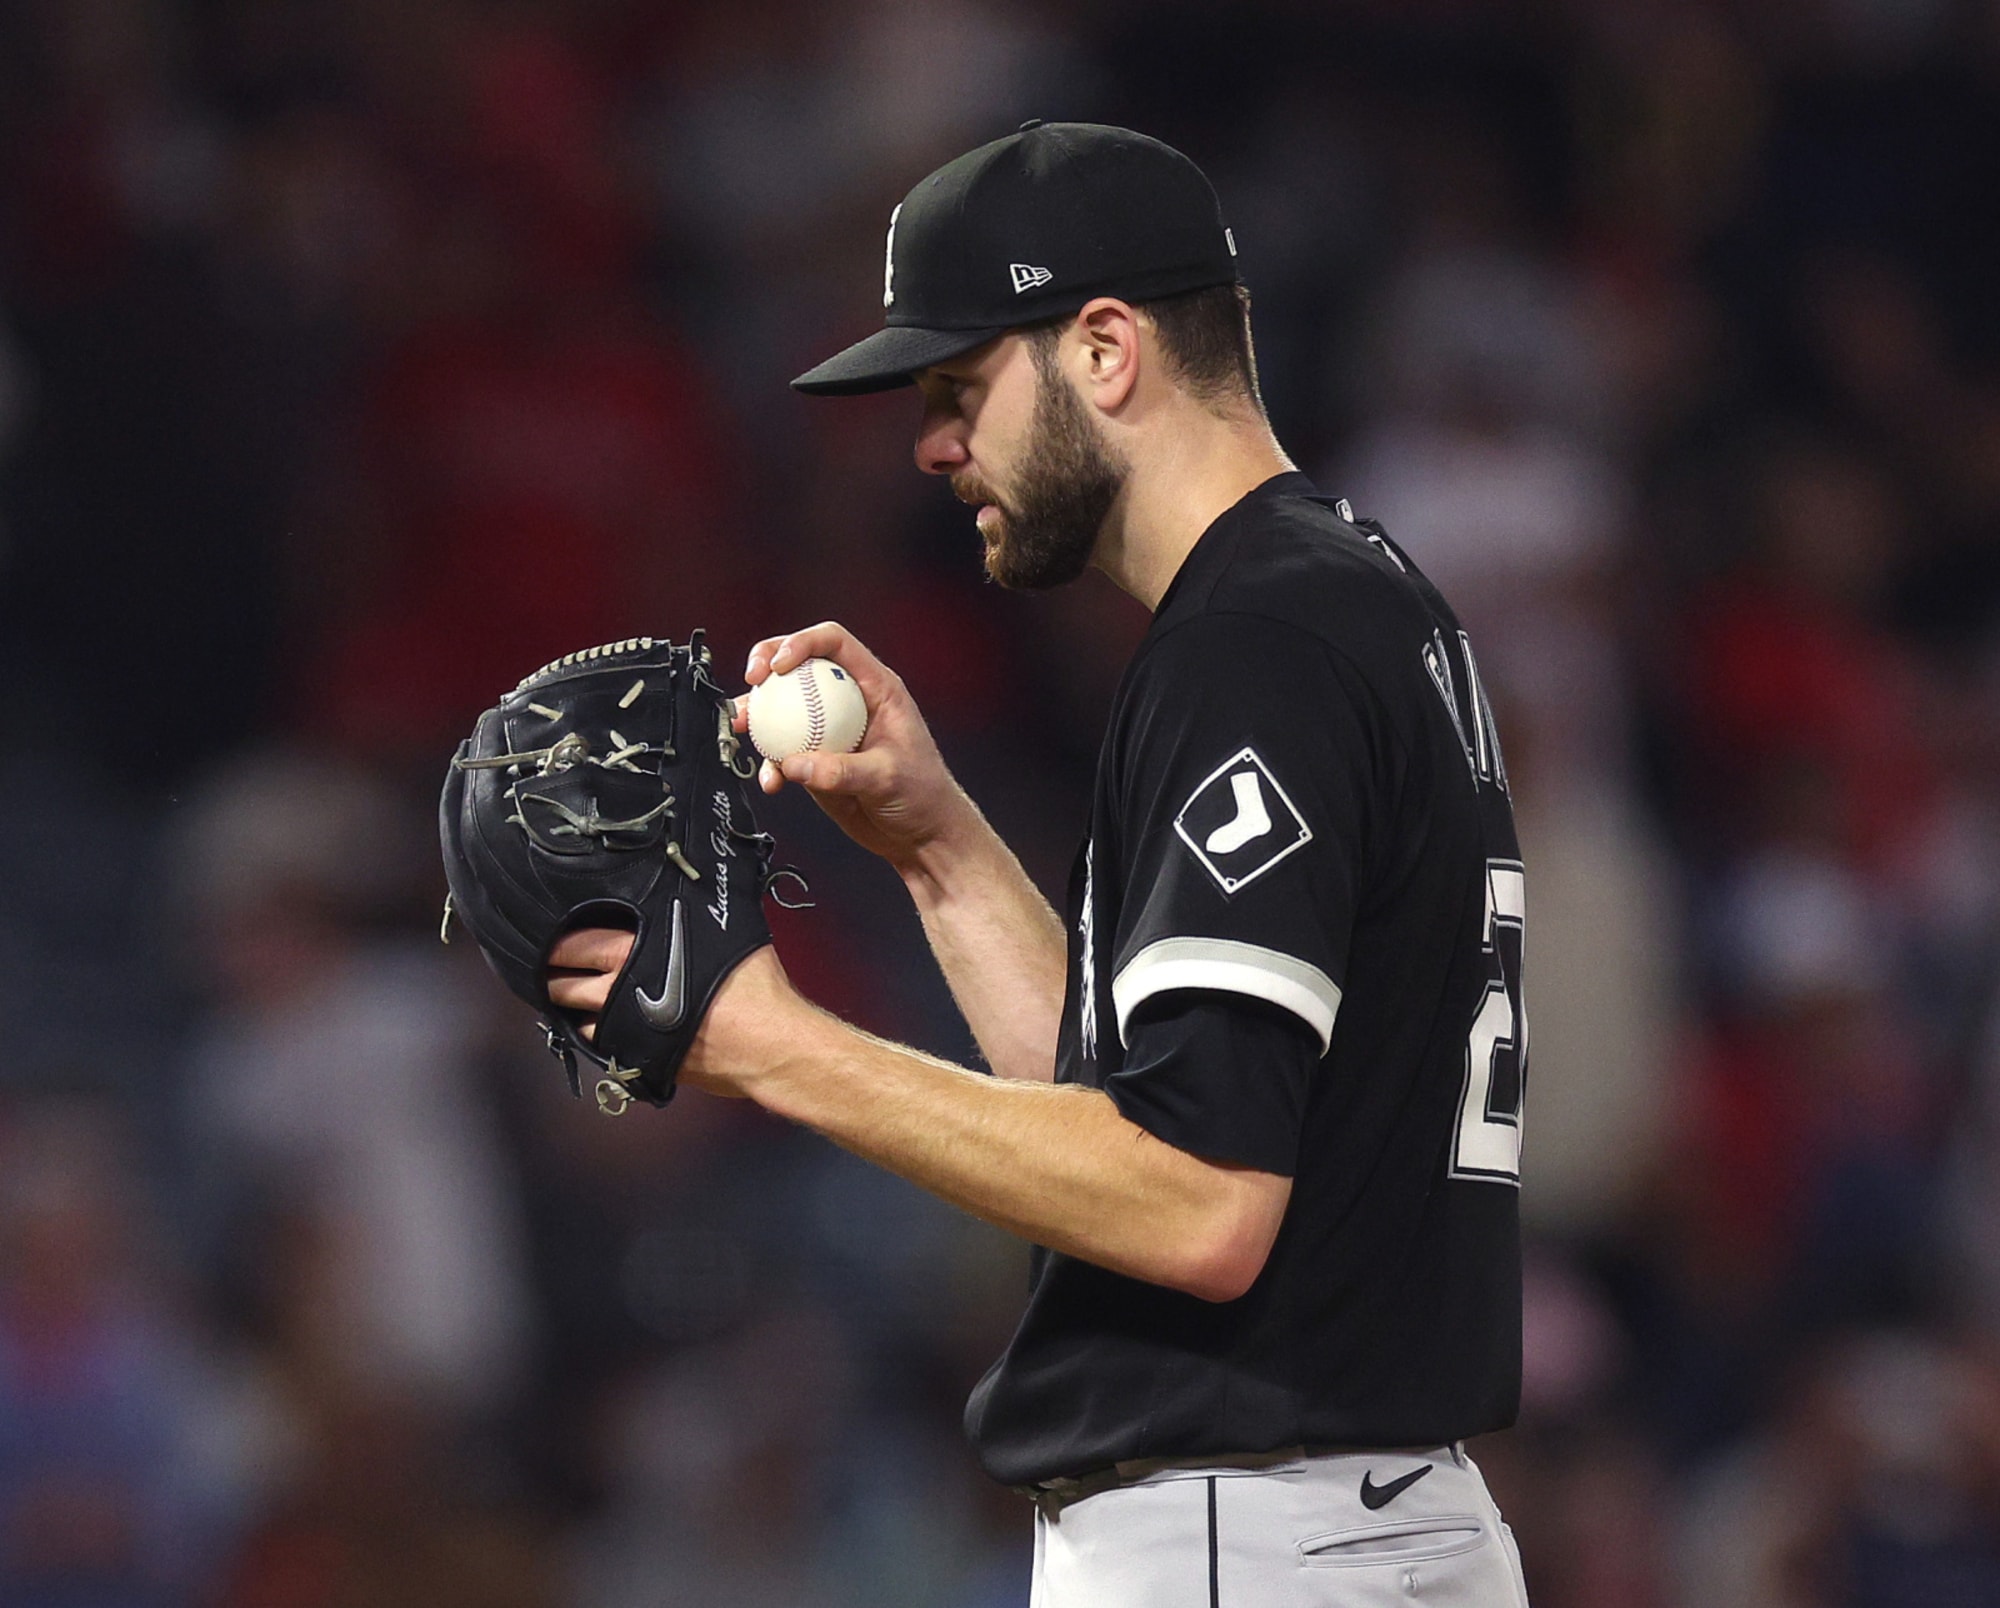 RUMOR: Will White Sox trade Dylan Cease ahead of 2023 deadline?